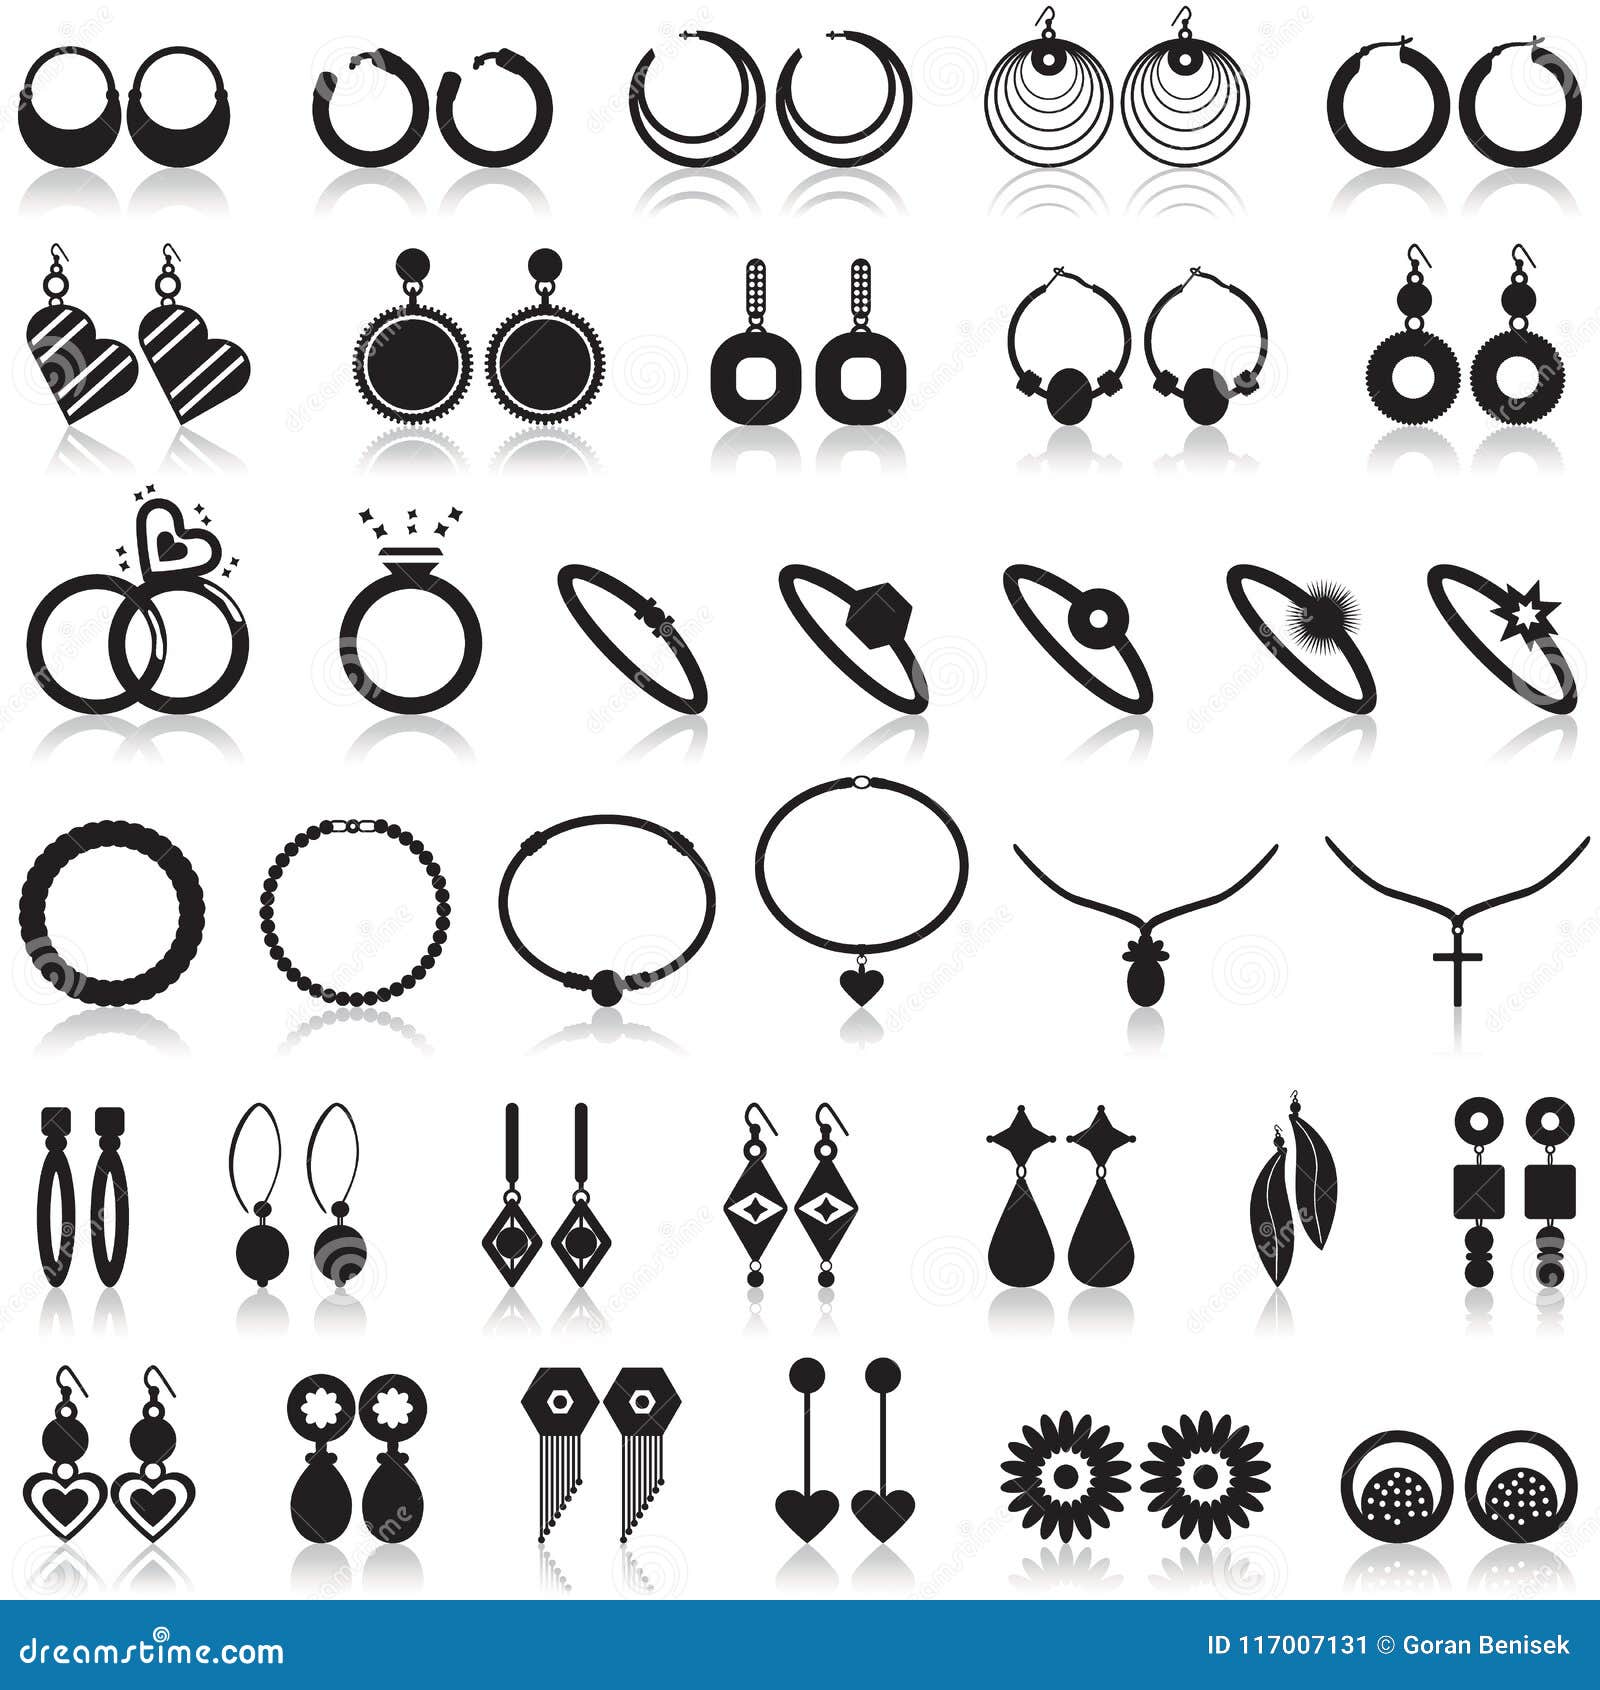 Jewelry items icons set stock vector. Illustration of earring - 117007131